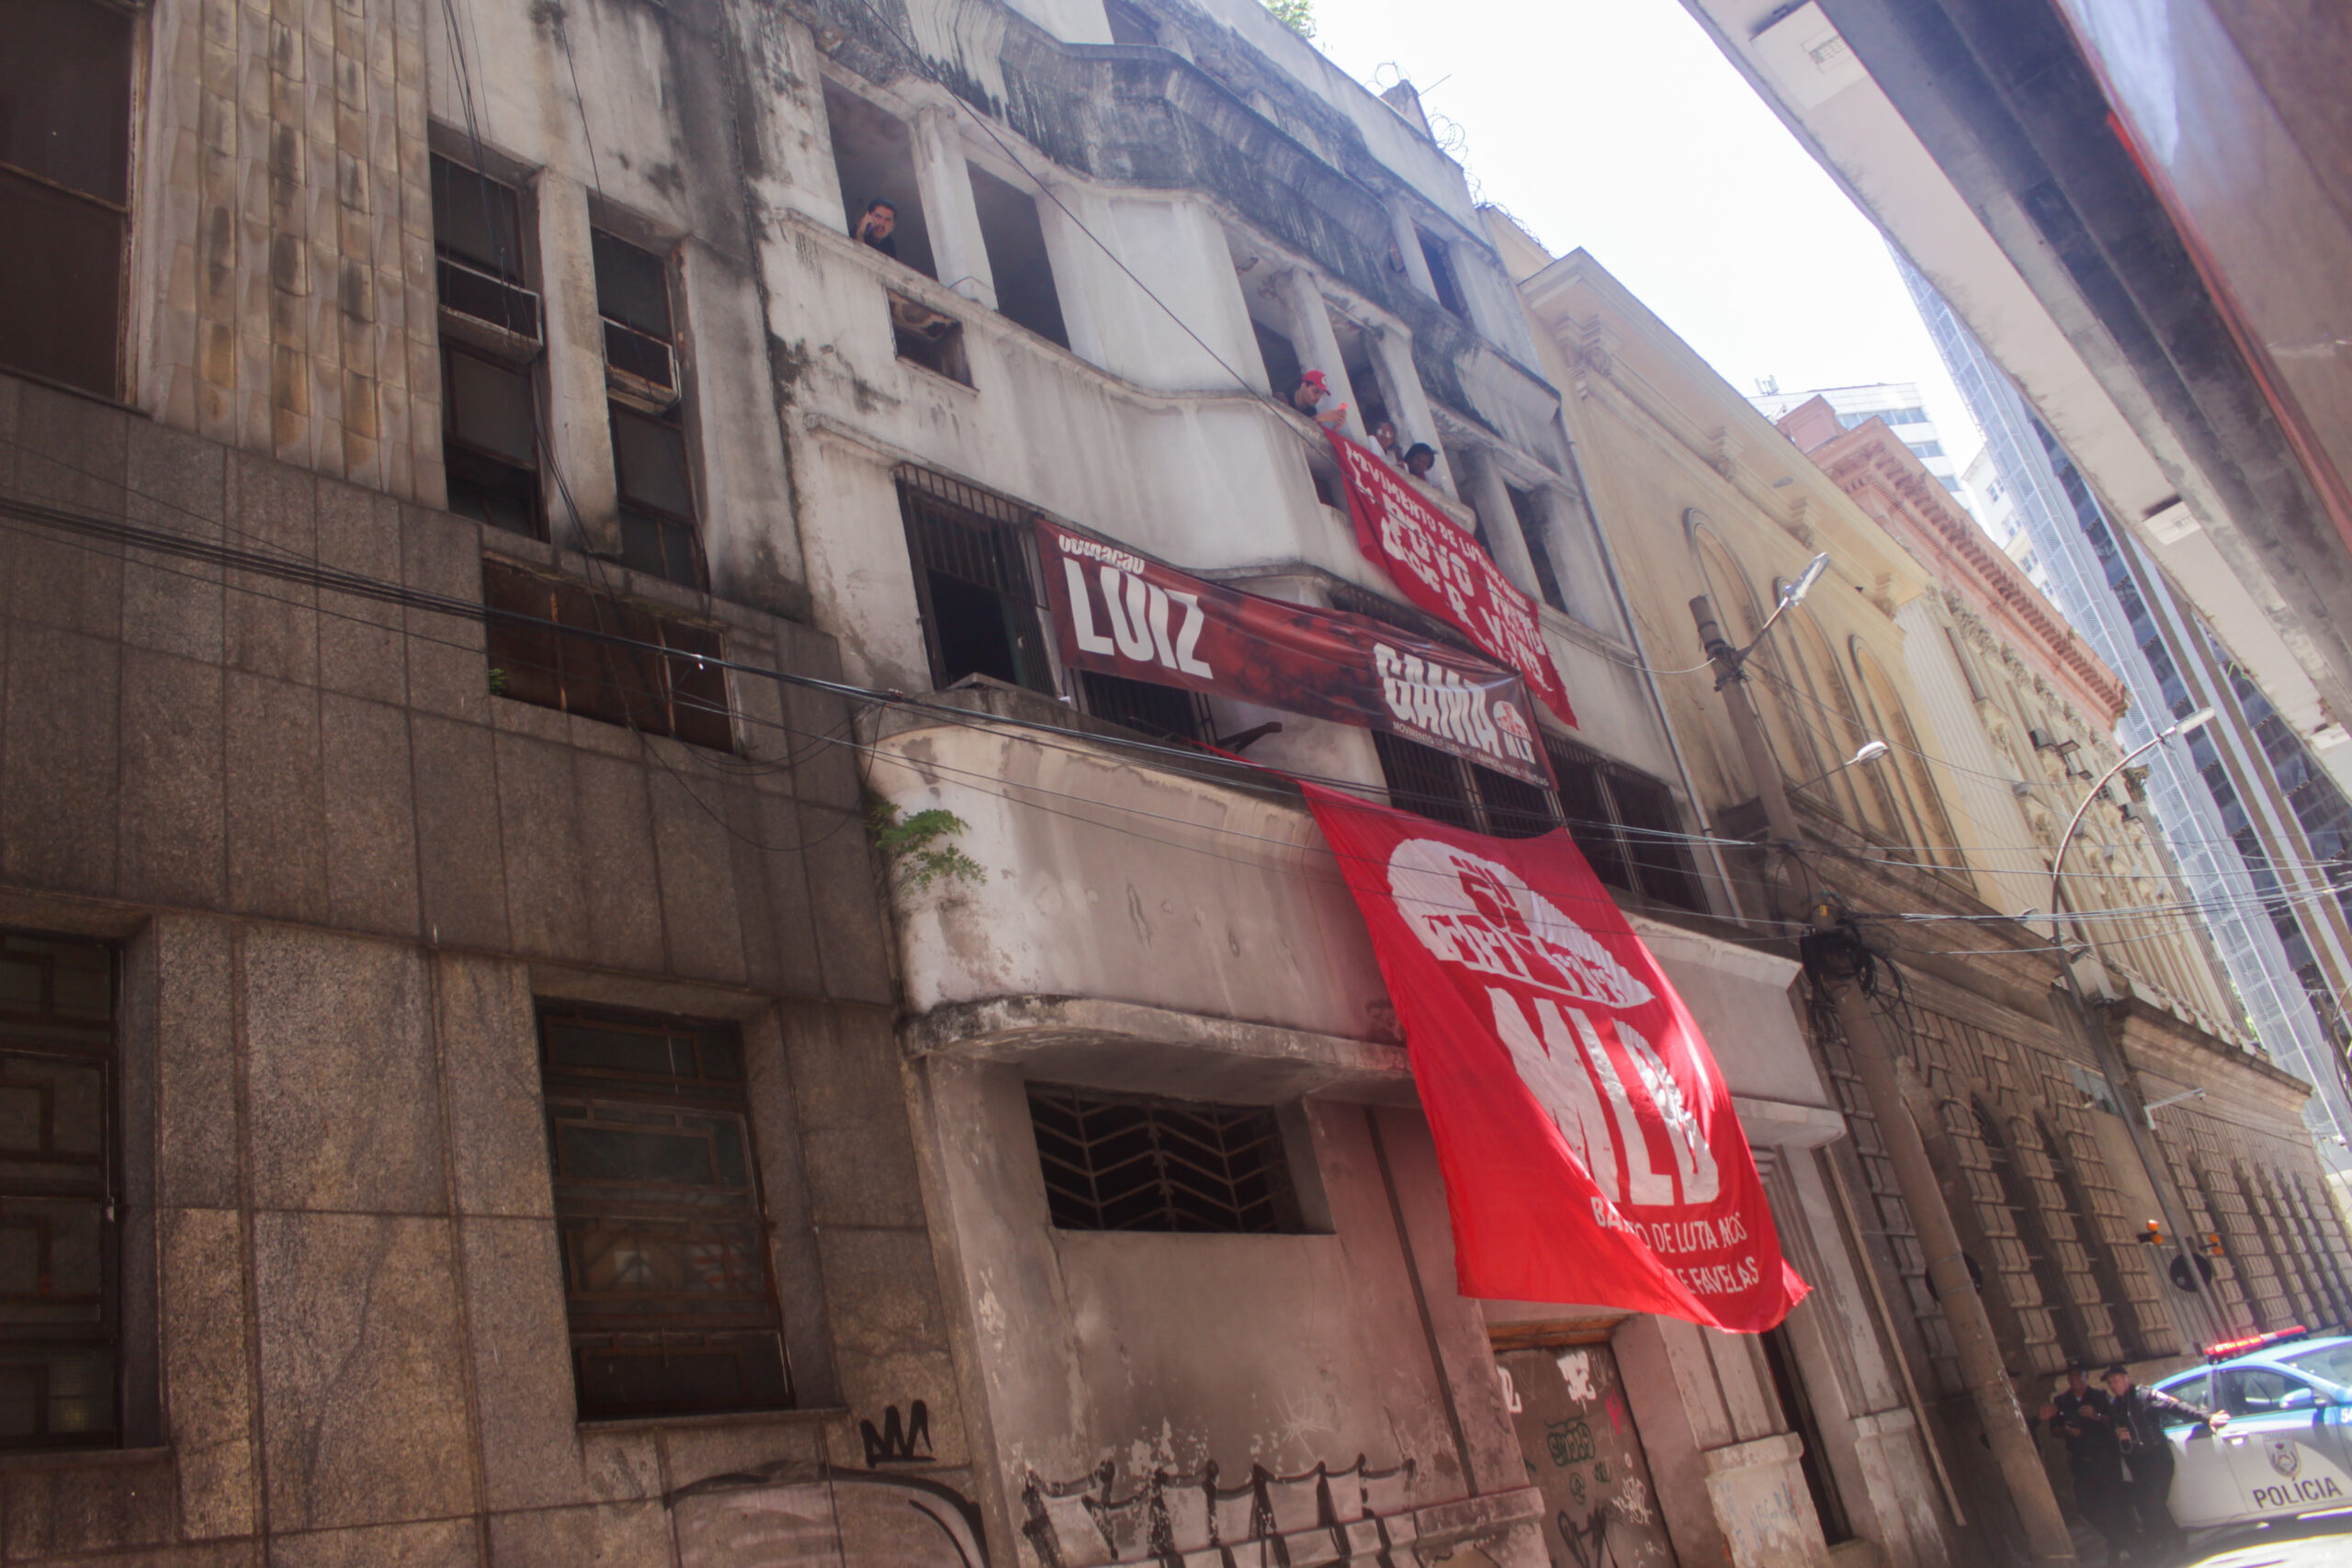 Days Before Christmas, Court Orders Eviction of the Luiz Gama Occupation in Downtown Rio de Janeiro